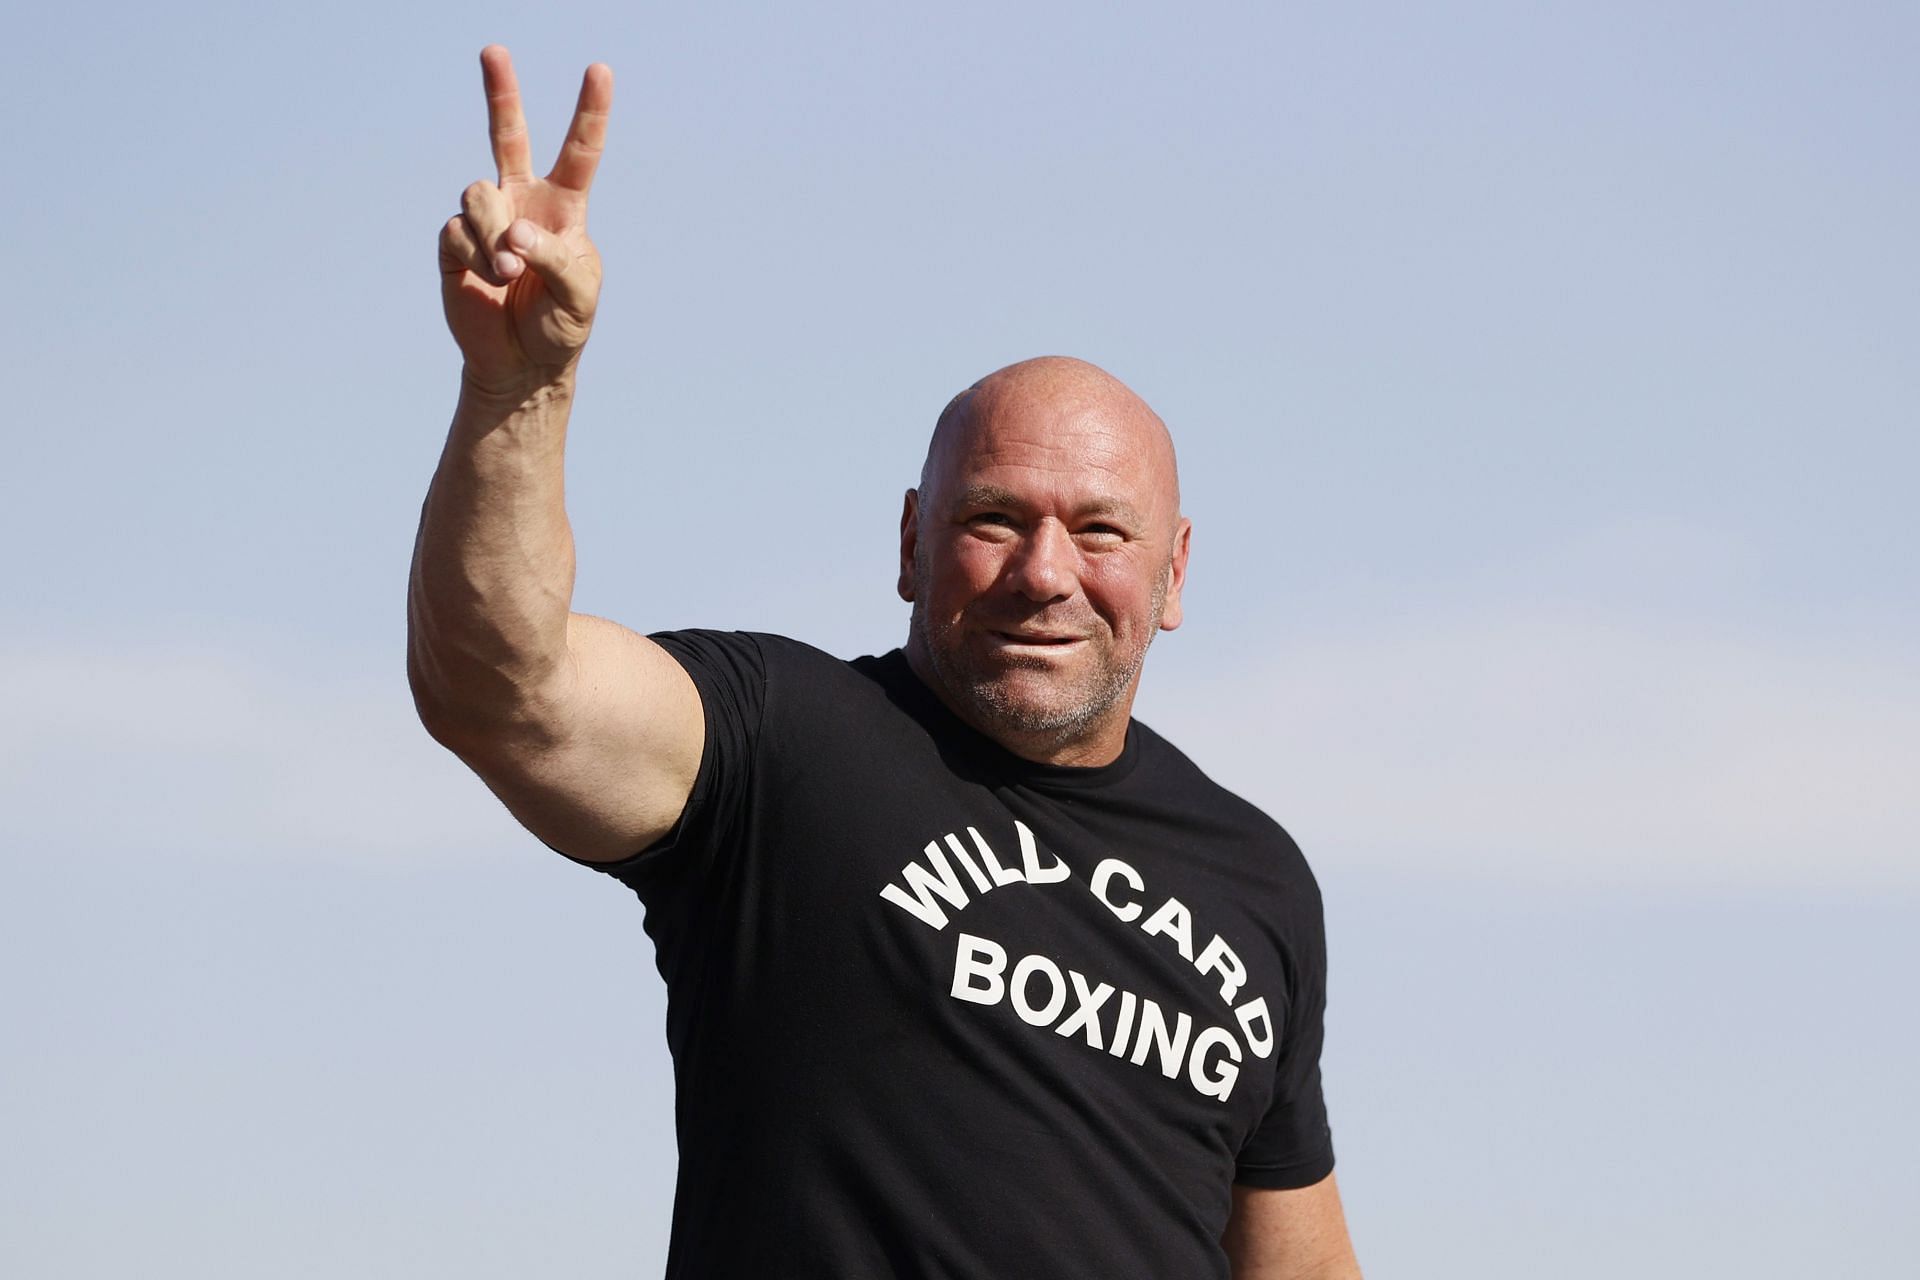 Dana White changed his lifestyle to live longer